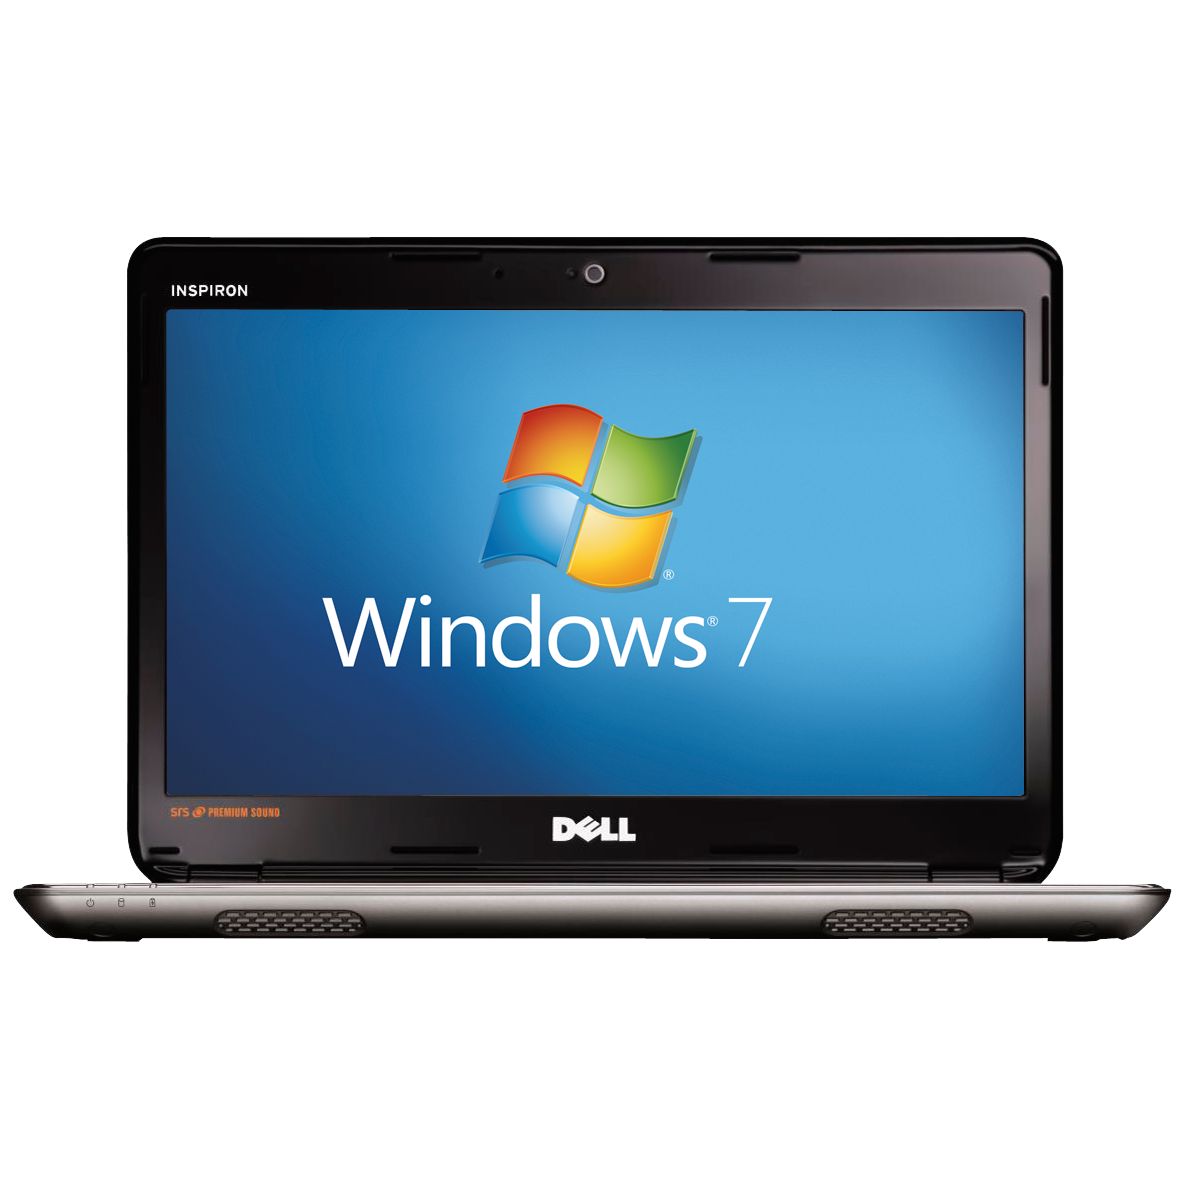 Dell Inspiron M301Z Laptop, AMD Turion, 500GB, 1.3GHz, 4GB RAM with 13.3 Inch Display at John Lewis